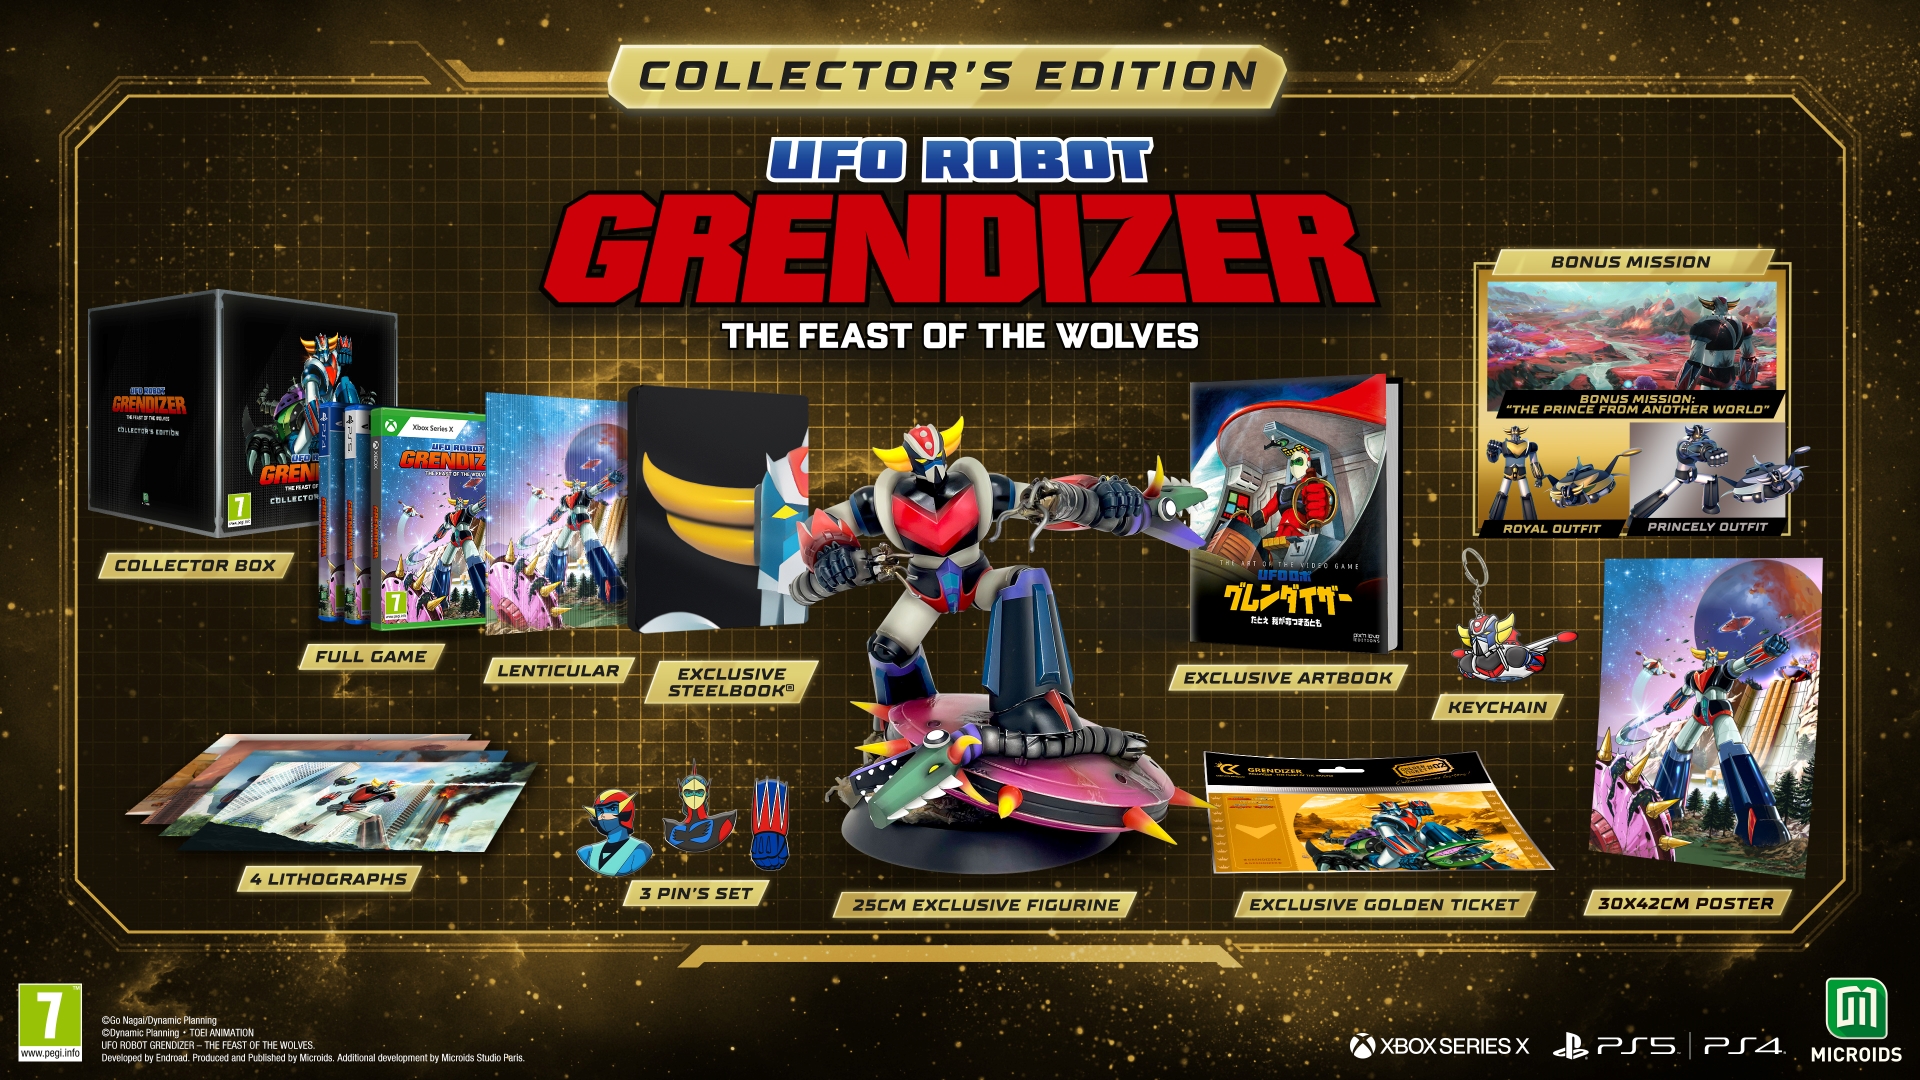 UFO ROBOT GRENDIZER : The Feast of the Wolves